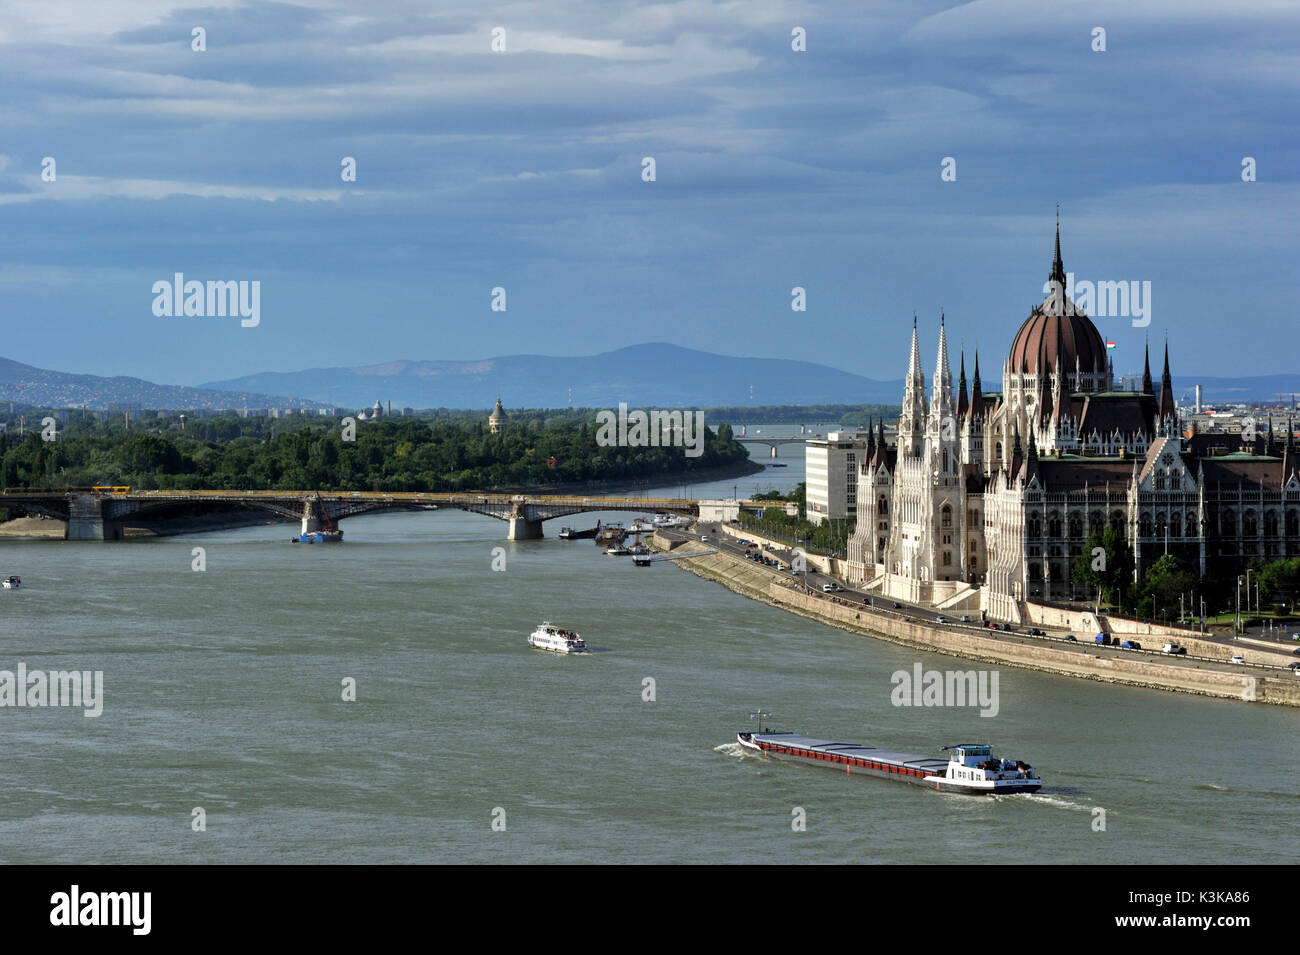 Hungary, Budapest, Pest, panorama of the Danube river and the parliament, listed as World Heritage by UNESCO Stock Photo